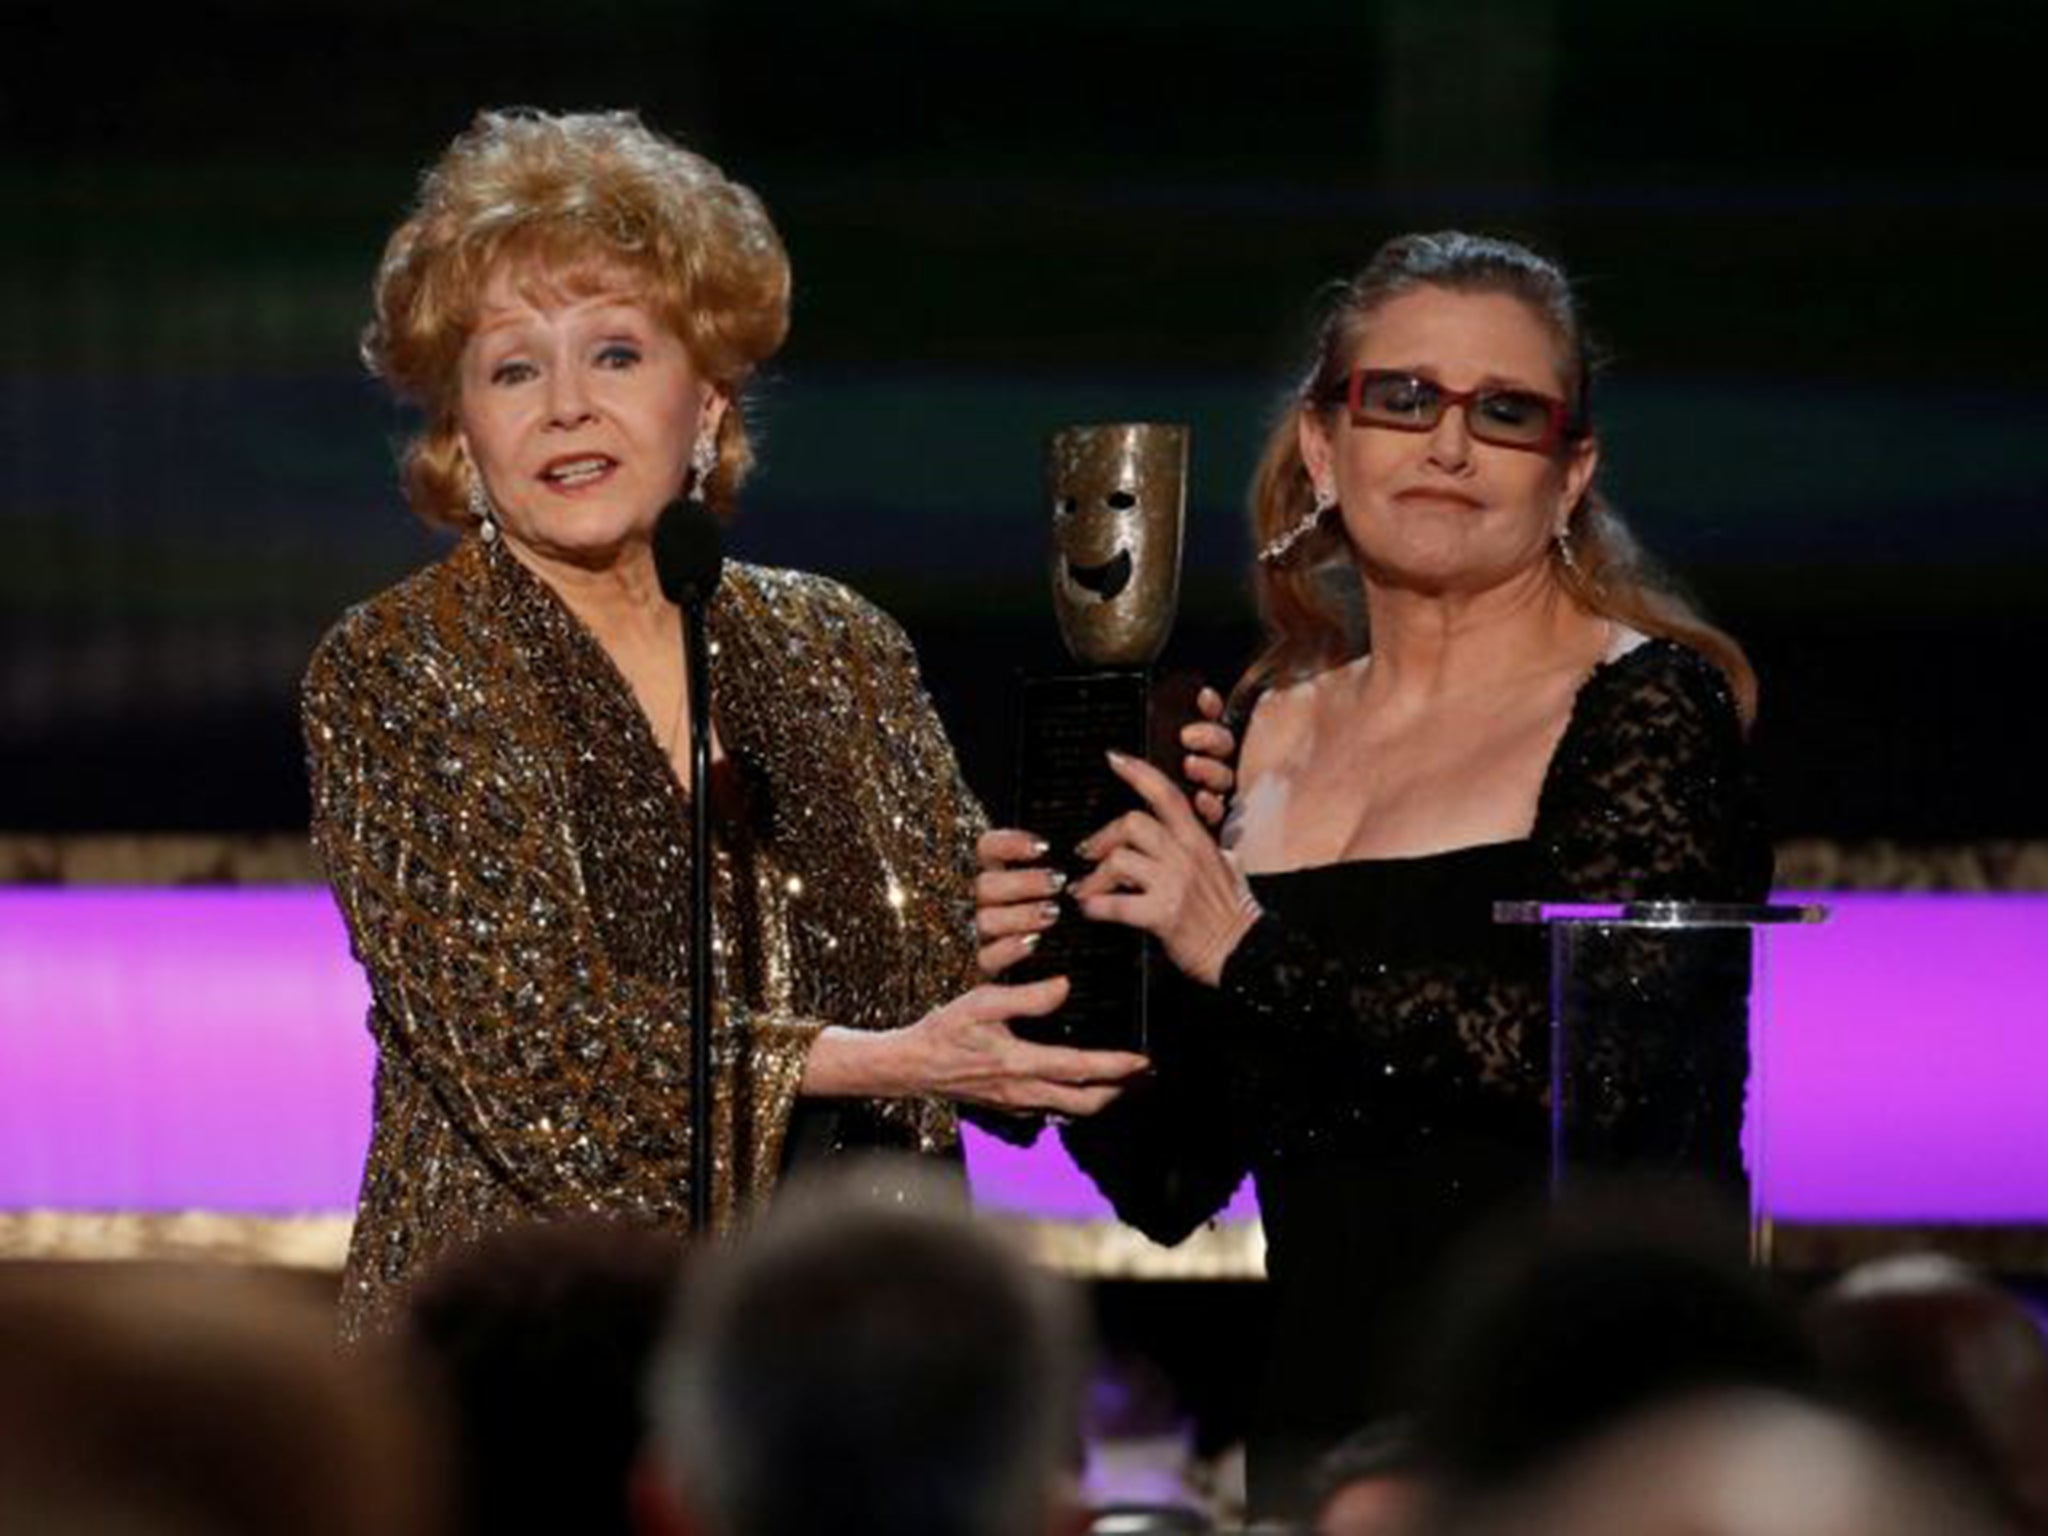 Debbie Reynolds (left) accepts the life achievement award from her daughter actress Carrie Fisher at the 21st annual Screen Actors Guild Awards in Los Angeles, 2015